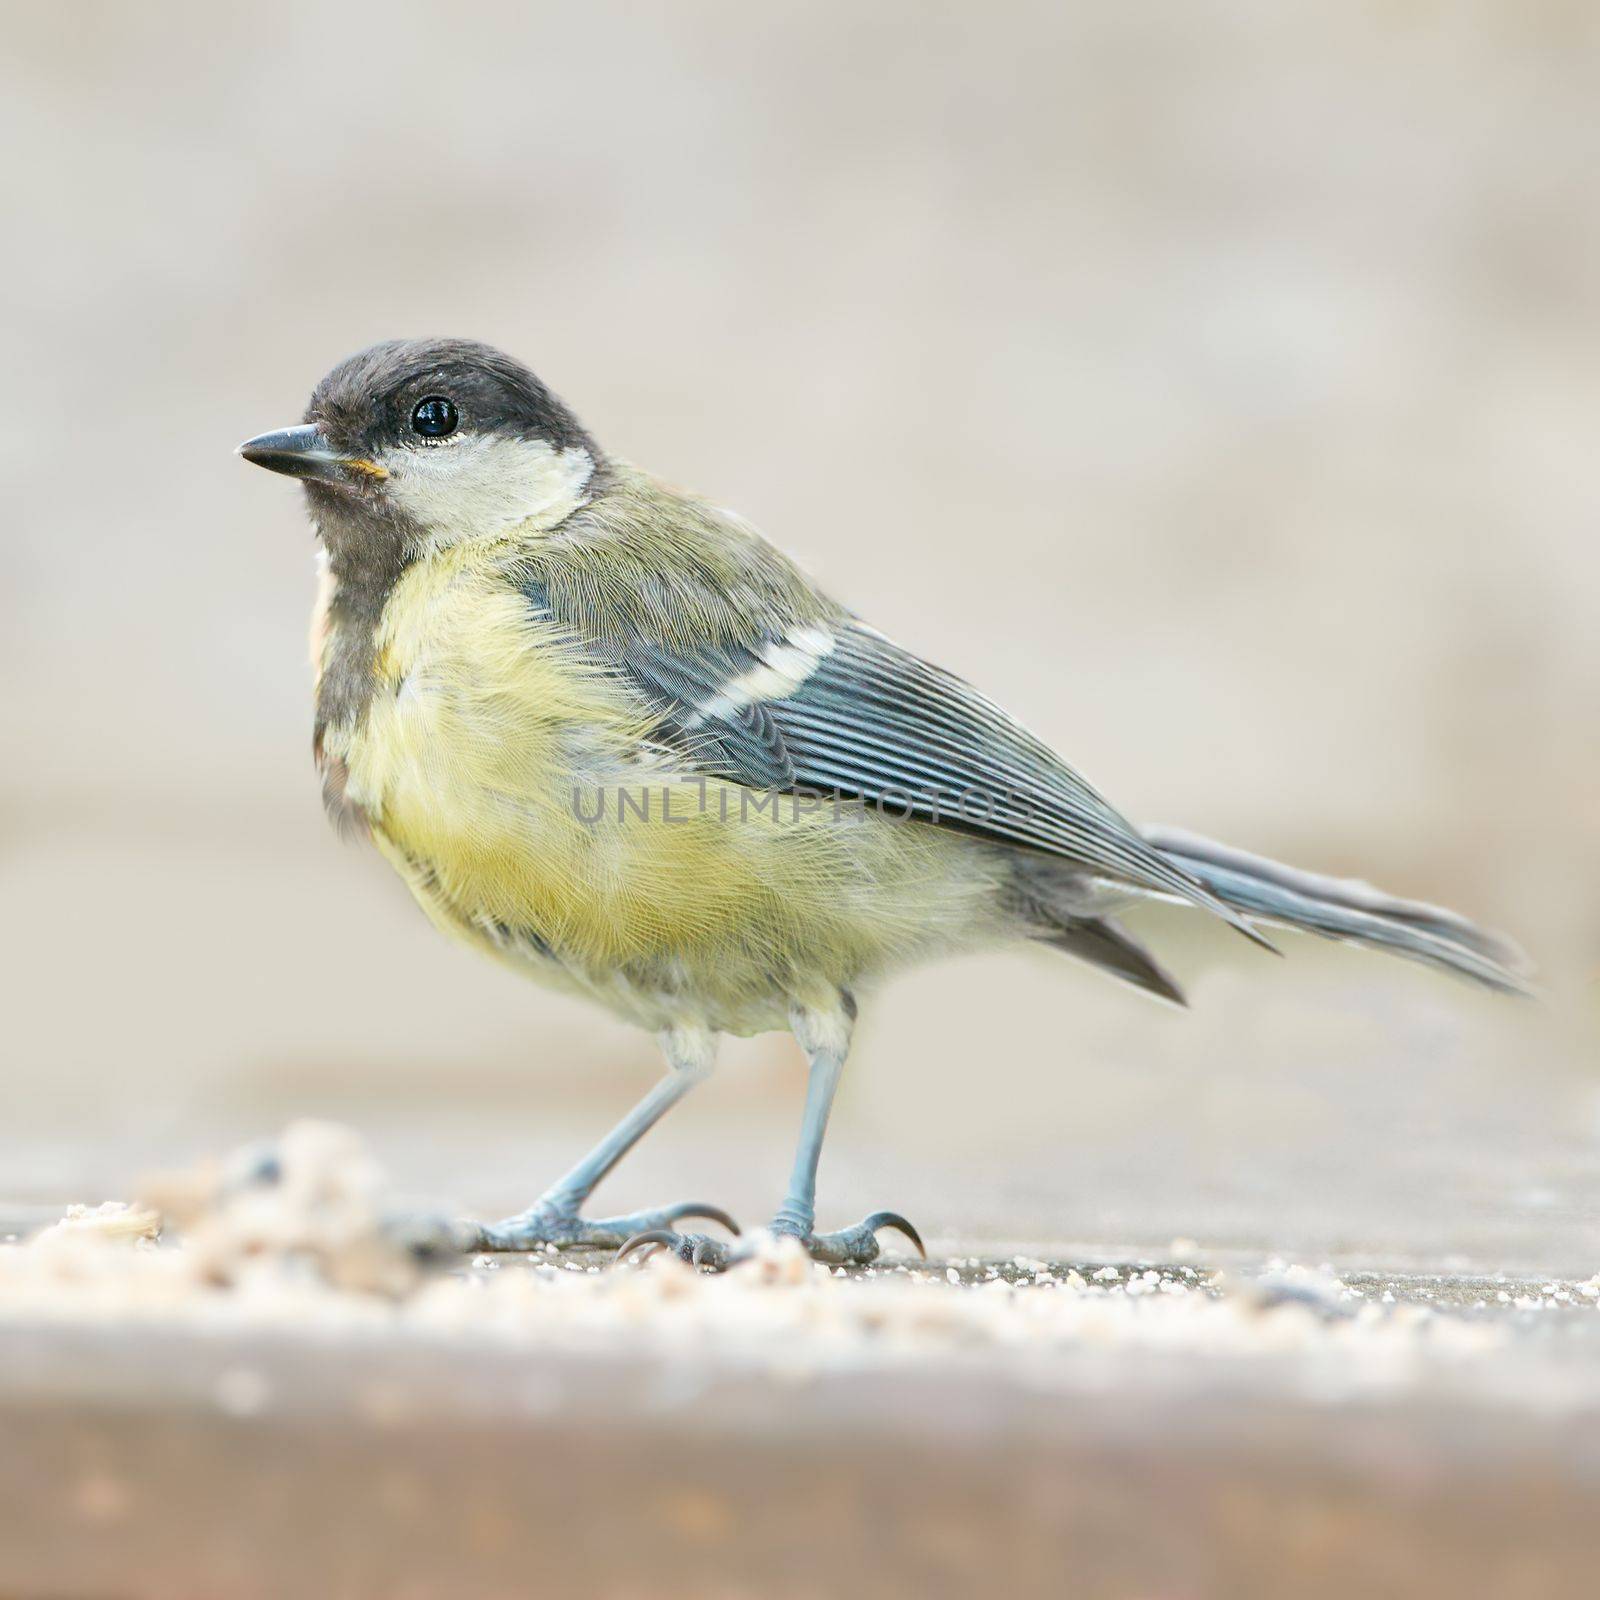 The Great Tit - Parus major. The Eurasian blue tit is a small passerine bird in the tit family Paridae. The bird is easily recognisable by its blue and yellow plumage. by YuriArcurs